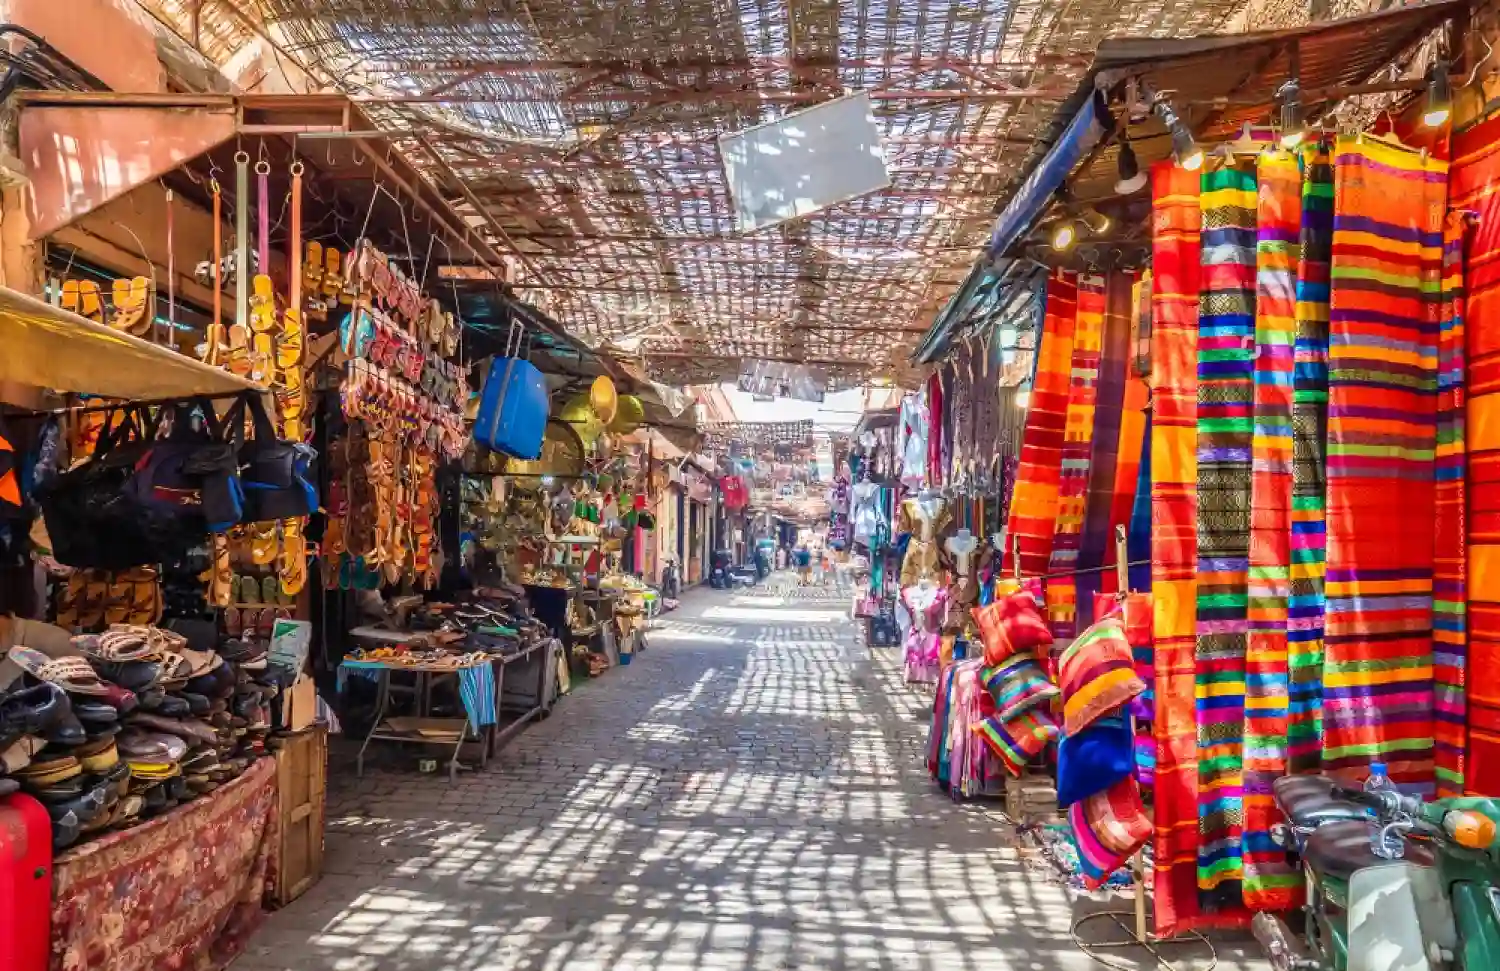 Day 10: Marrakech: Exploring the Red City